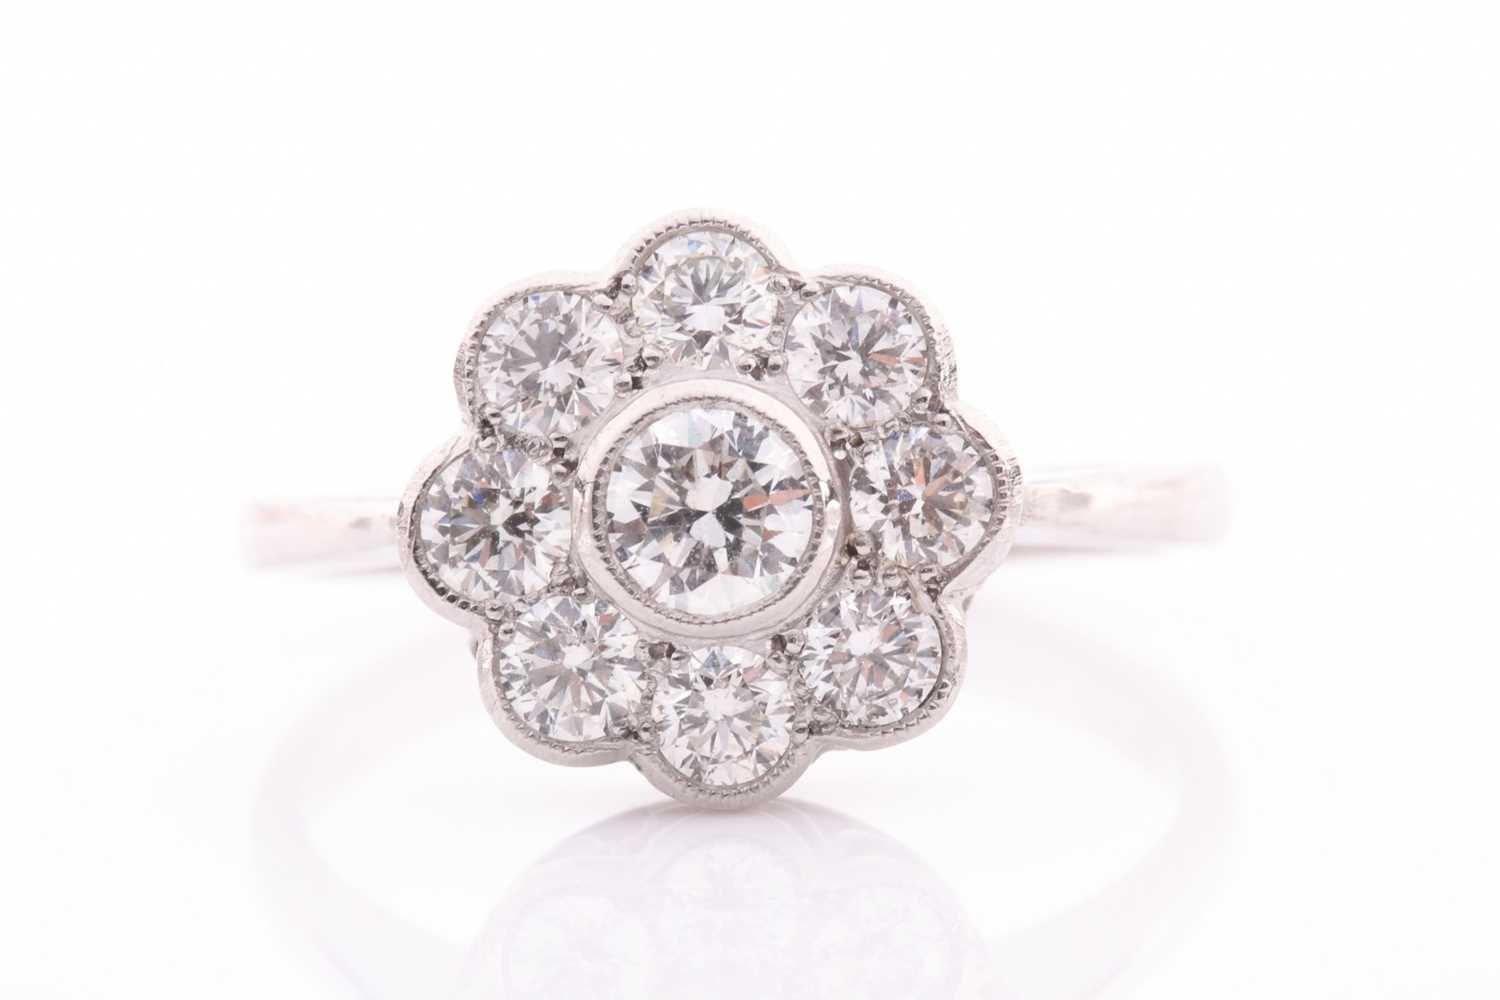 A platinum and diamond daisy cluster ring, set with round-cut diamonds of approximately 1.0 carats